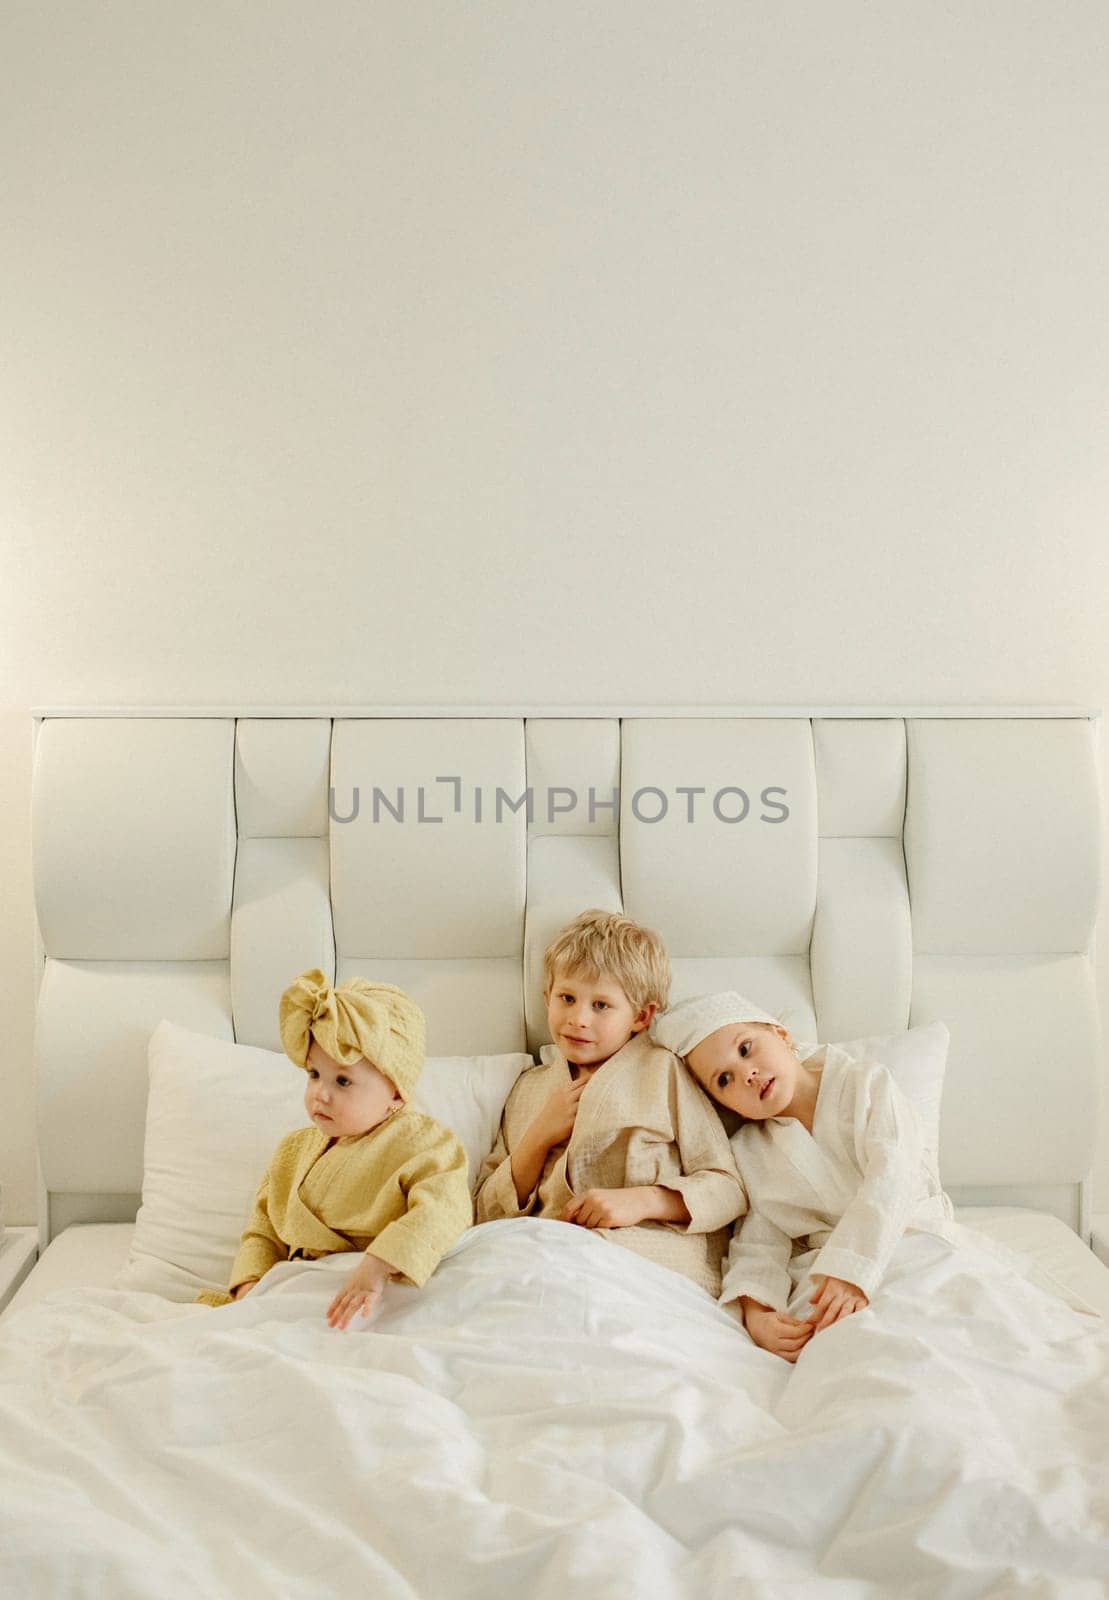 Children lie in bed in bathrobes after taking a bath. by Sd28DimoN_1976